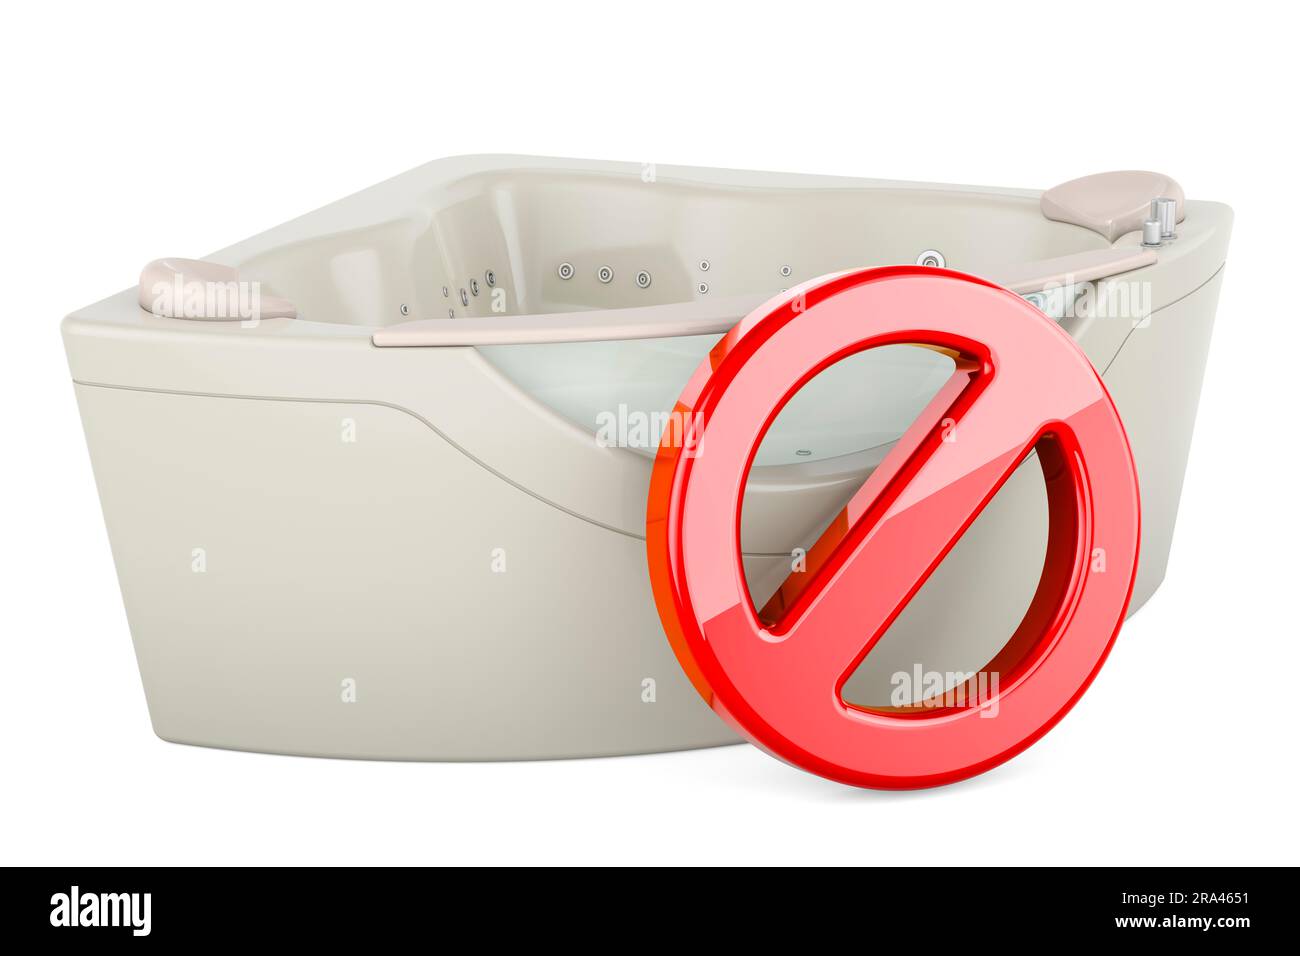 Hydromassage tub with prohibition sign. 3D rendering isolated on white background Stock Photo